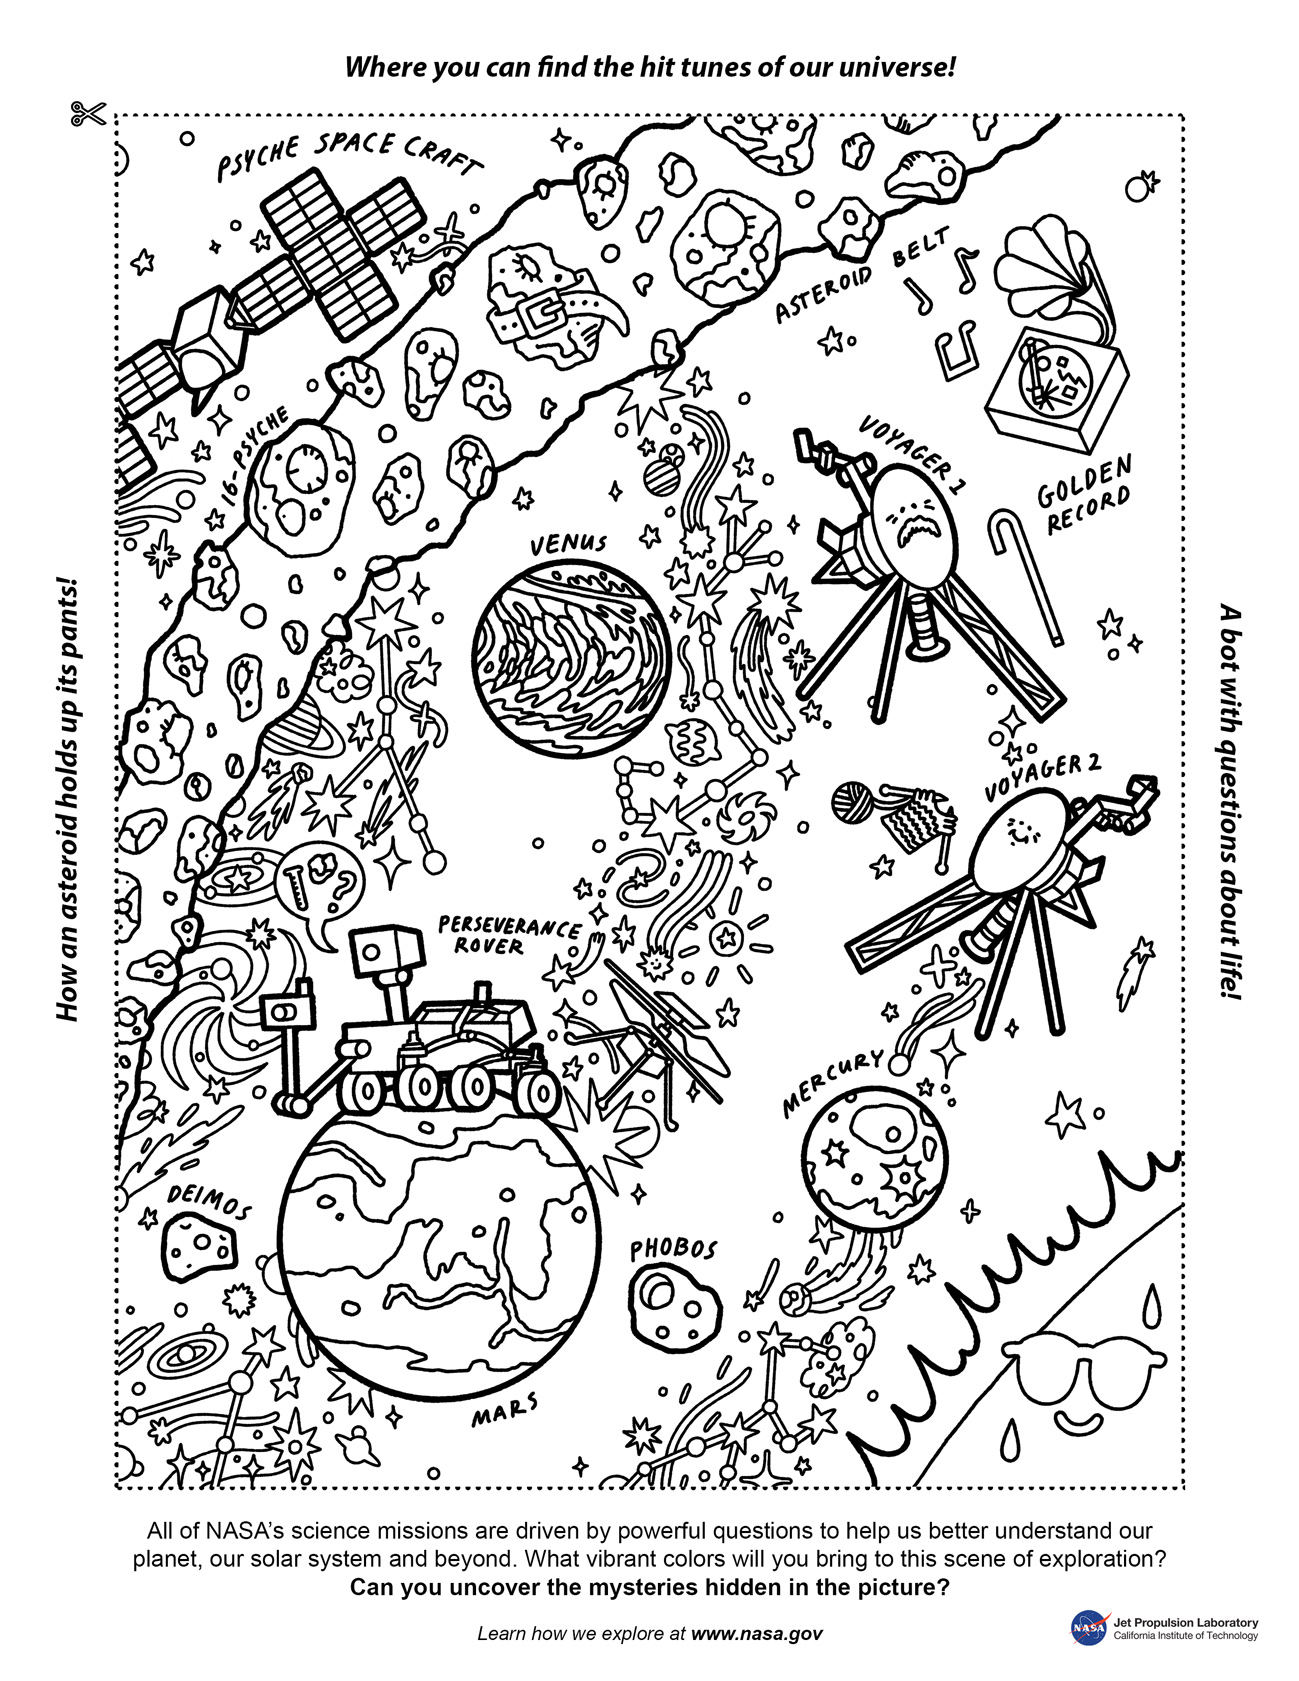 coloring page featuring Mercury, Venus, Mars, the Perseverance Rover, the Voyager missions, and the asteroid belt